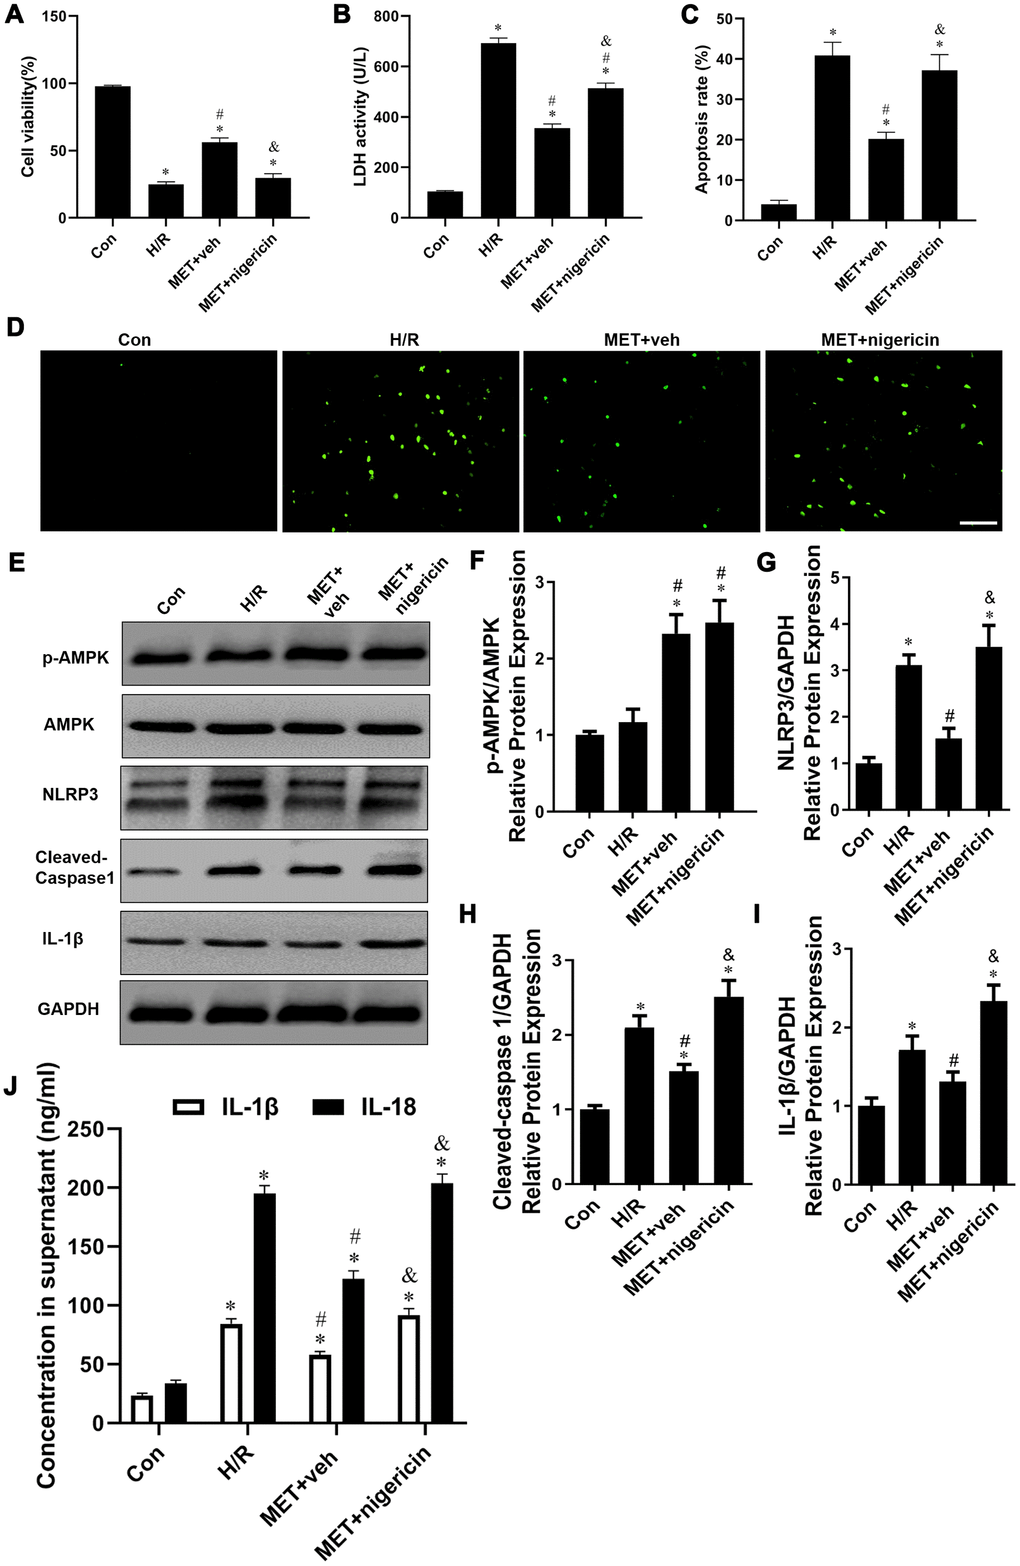 Activation of NLRP3 with nigericin abolished Metformin-inhibited the release of pro-inflammatory factor in vitro. (A) Cell viability was measured by MTT assay (n = 6 per group). (B) The supernatant was collected and used to determine the LDH activity (n = 6 per group). (C) Statistical results of TUNEL-positive cells per field. (D) Tunel assay (apoptotic cells stained in green fluorescence) was performed to assess examine the apoptosis rate of NRVM cells in all groups (n = 6 per group). Magnification 200x, Scale bar = 100 μm; (E) Western blots were performed to determine p-AMPK, AMPK, NLRP3, cleaved-caspase 1, IL-1β and GAPDH in the total cell lysates. (F–I) Quantitative analysis of p-AMPK, AMPK, NLRP3, cleaved-caspase 1, IL-1β expression and calculate the ratio of p-AMPK/AMPK (n = 4 per group). (J) The levels of IL-1β, IL-18 and TNF-α in the supernatant from NCVMs were detected by ELISA (n = 6 per group). Values are expressed as the mean ± SEM. * P P P 